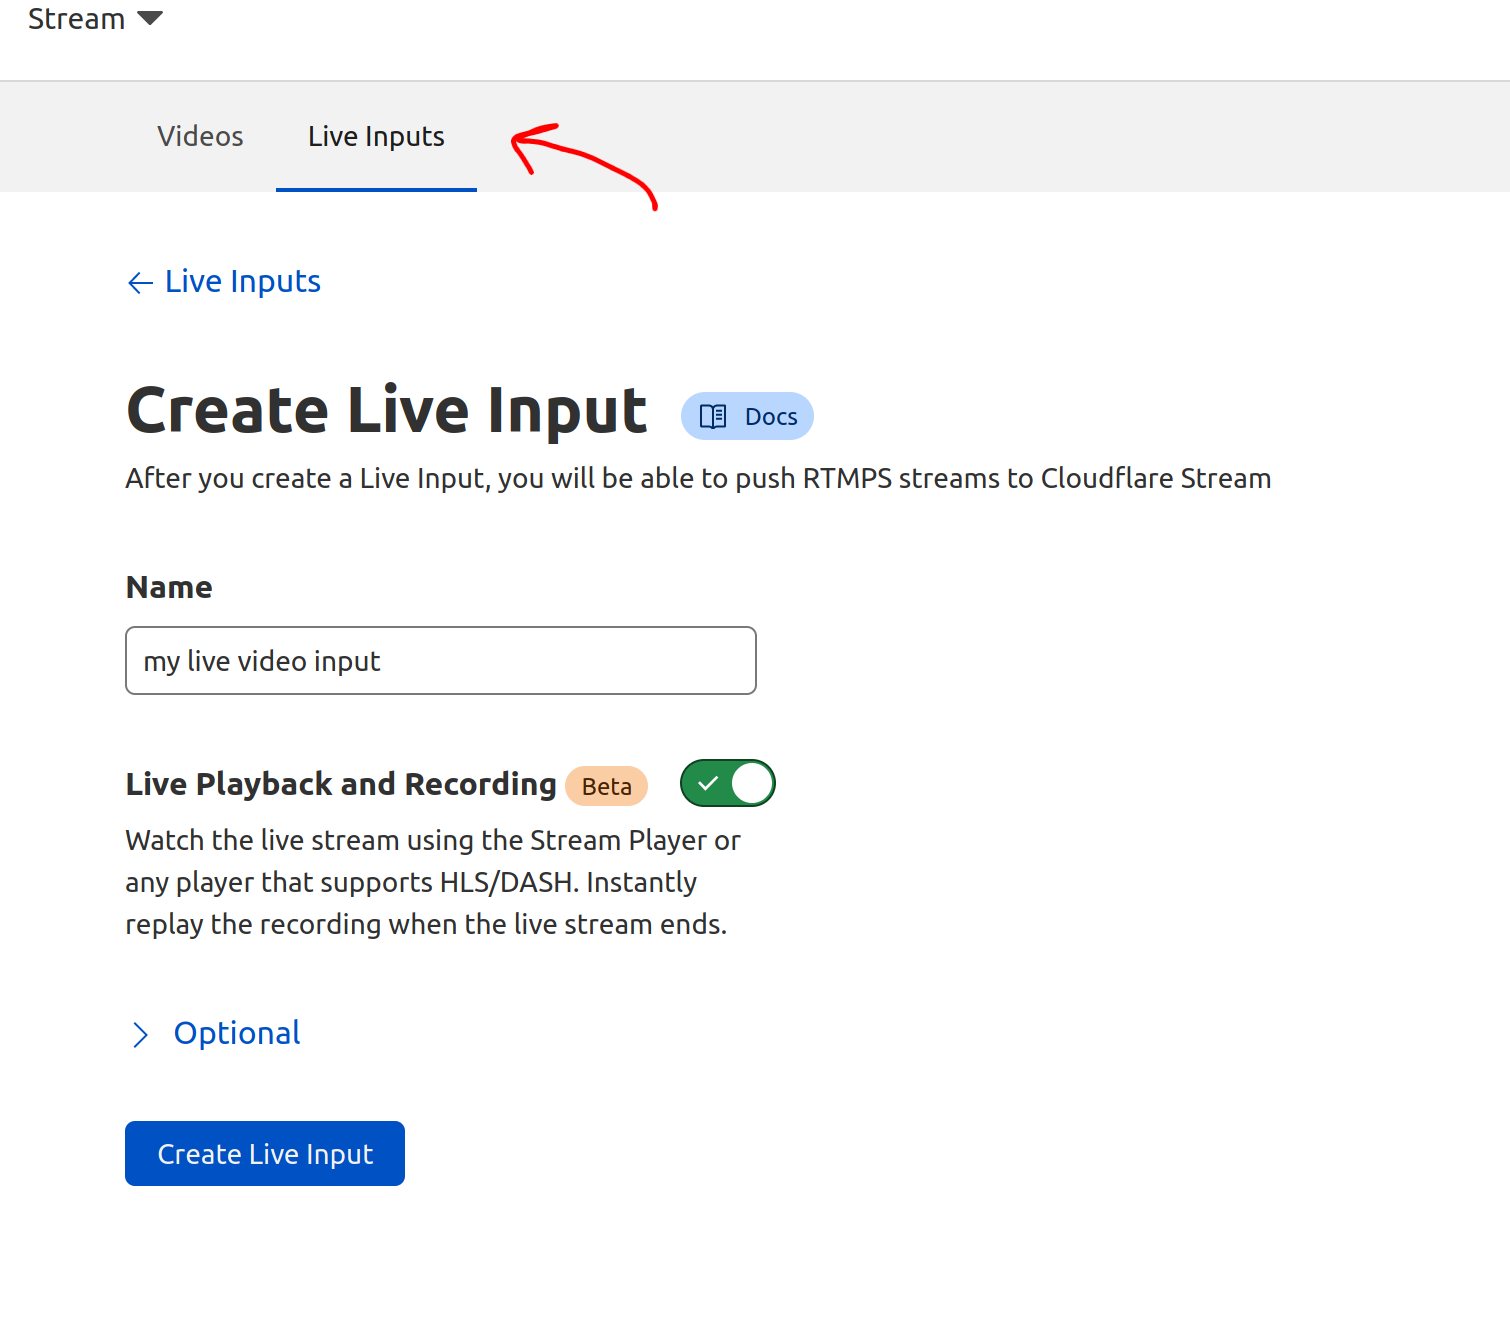 Serverless Live Streaming with Cloudflare Stream